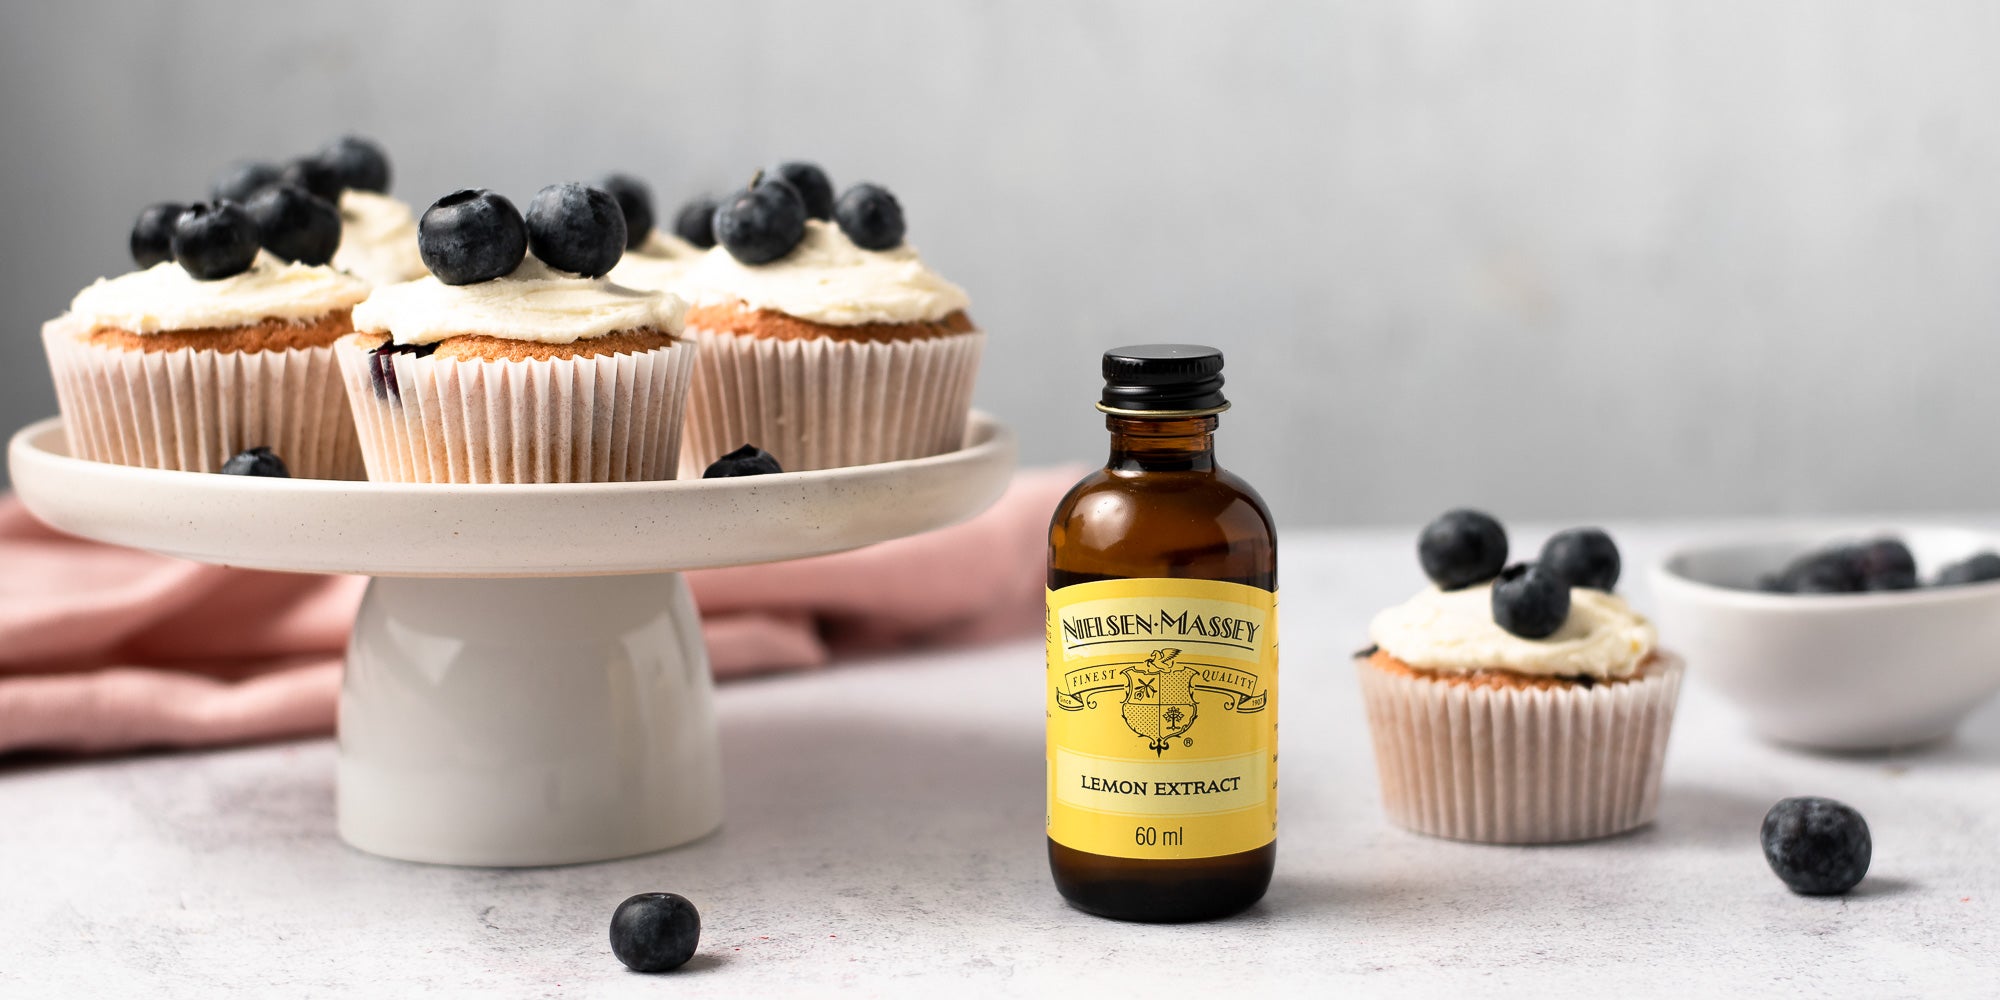 Cupcakes topped with icing and blueberries next to lemon extract